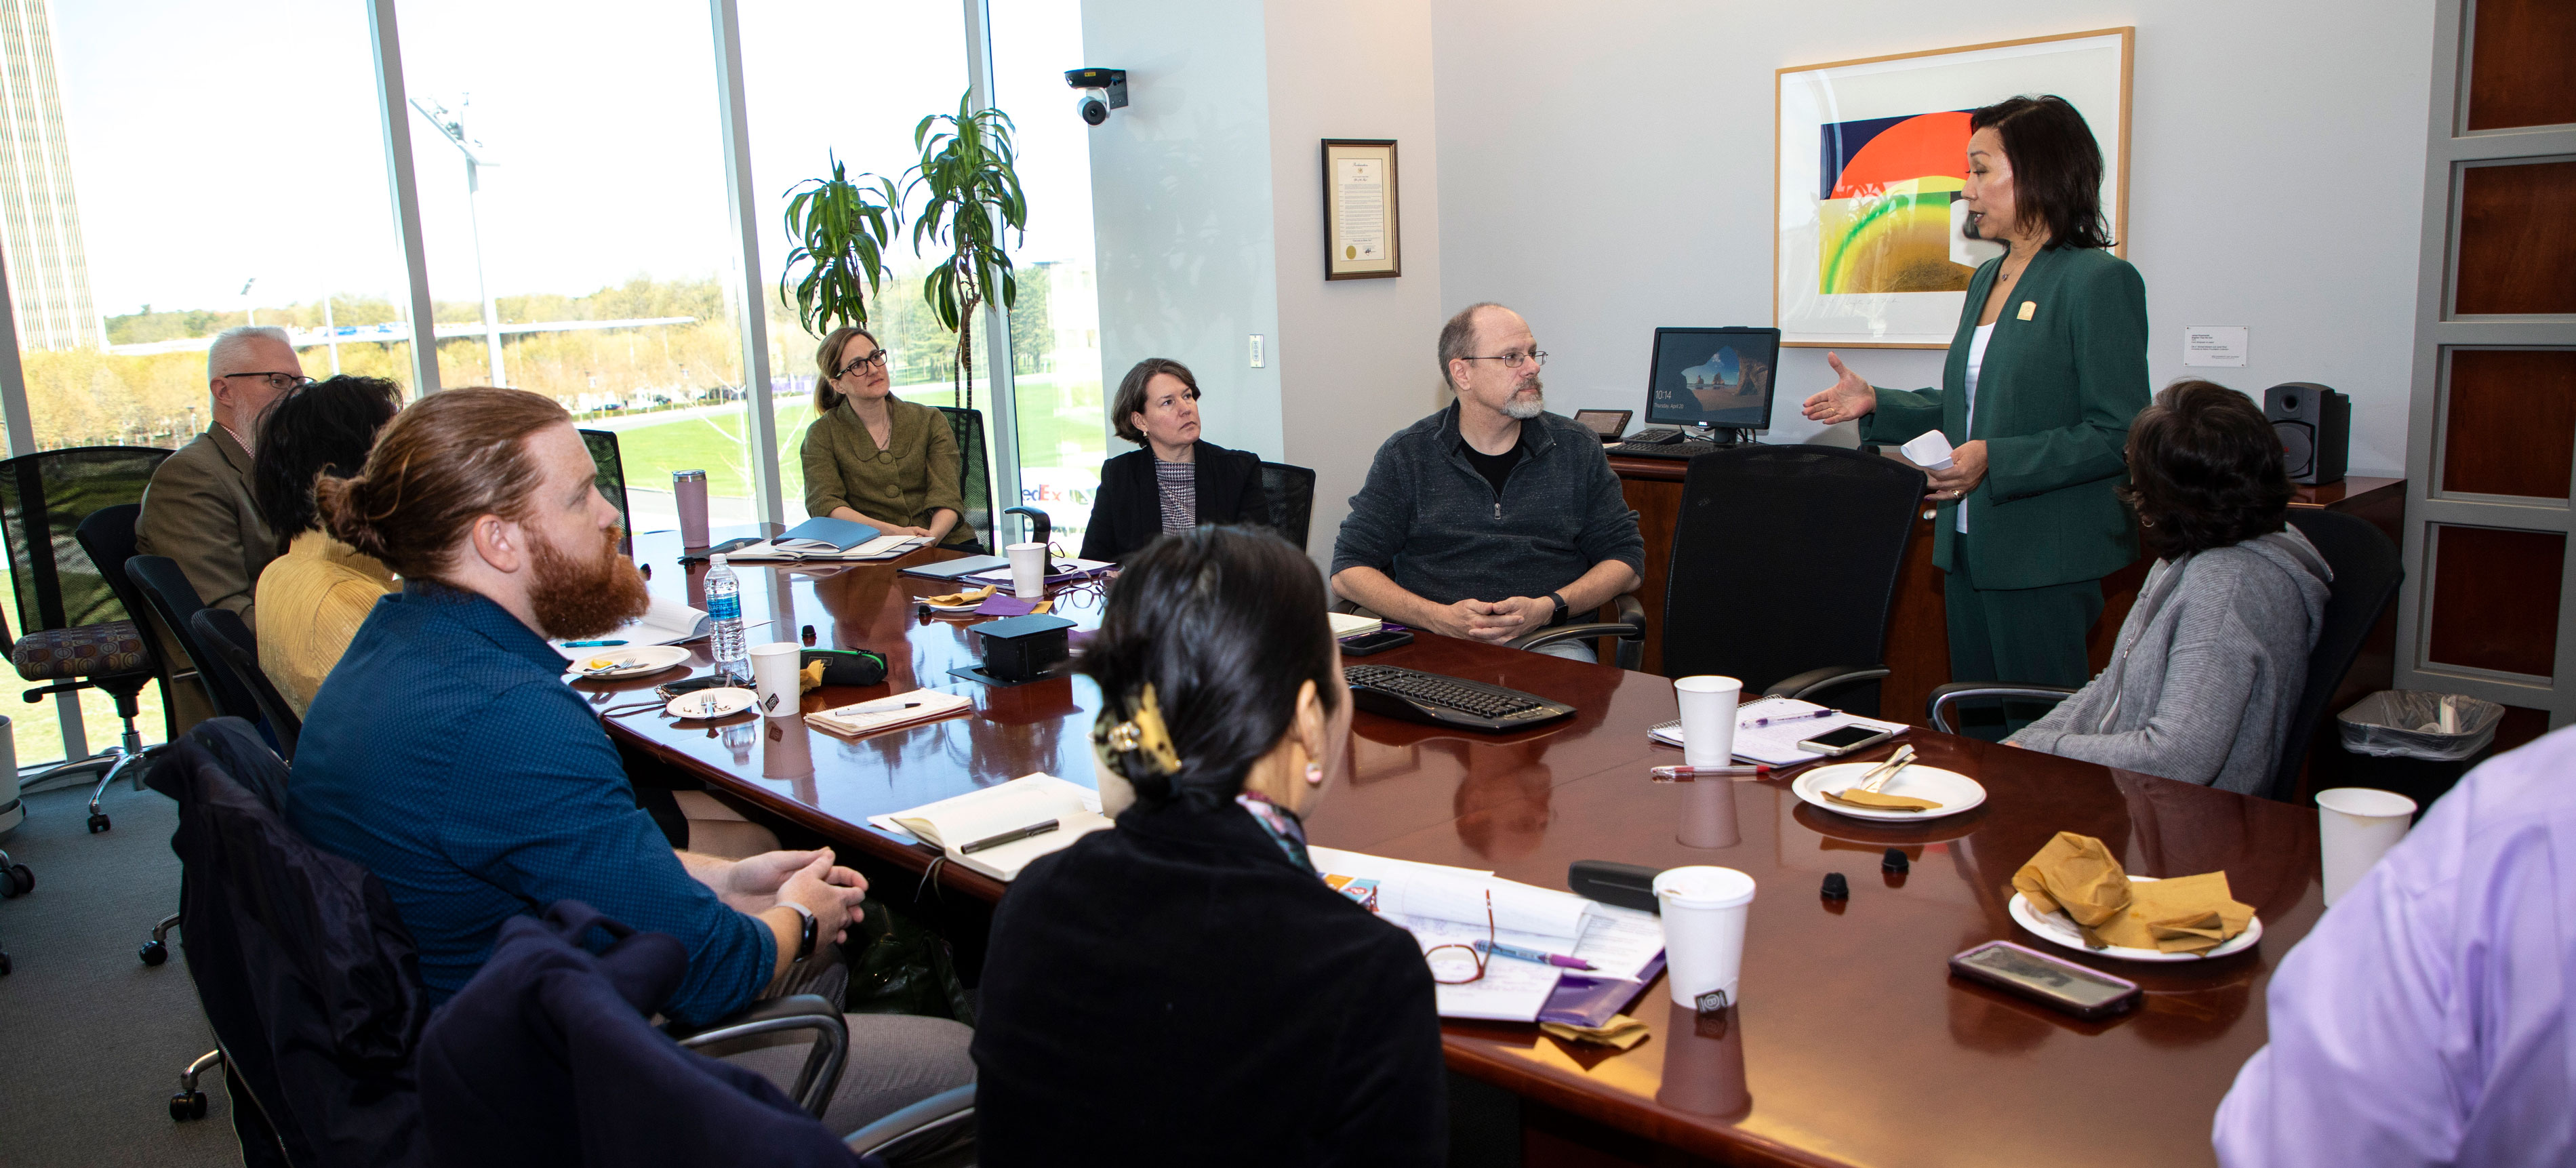 Provost Carol Kim speaks to nine faculty members seated at a conference table.